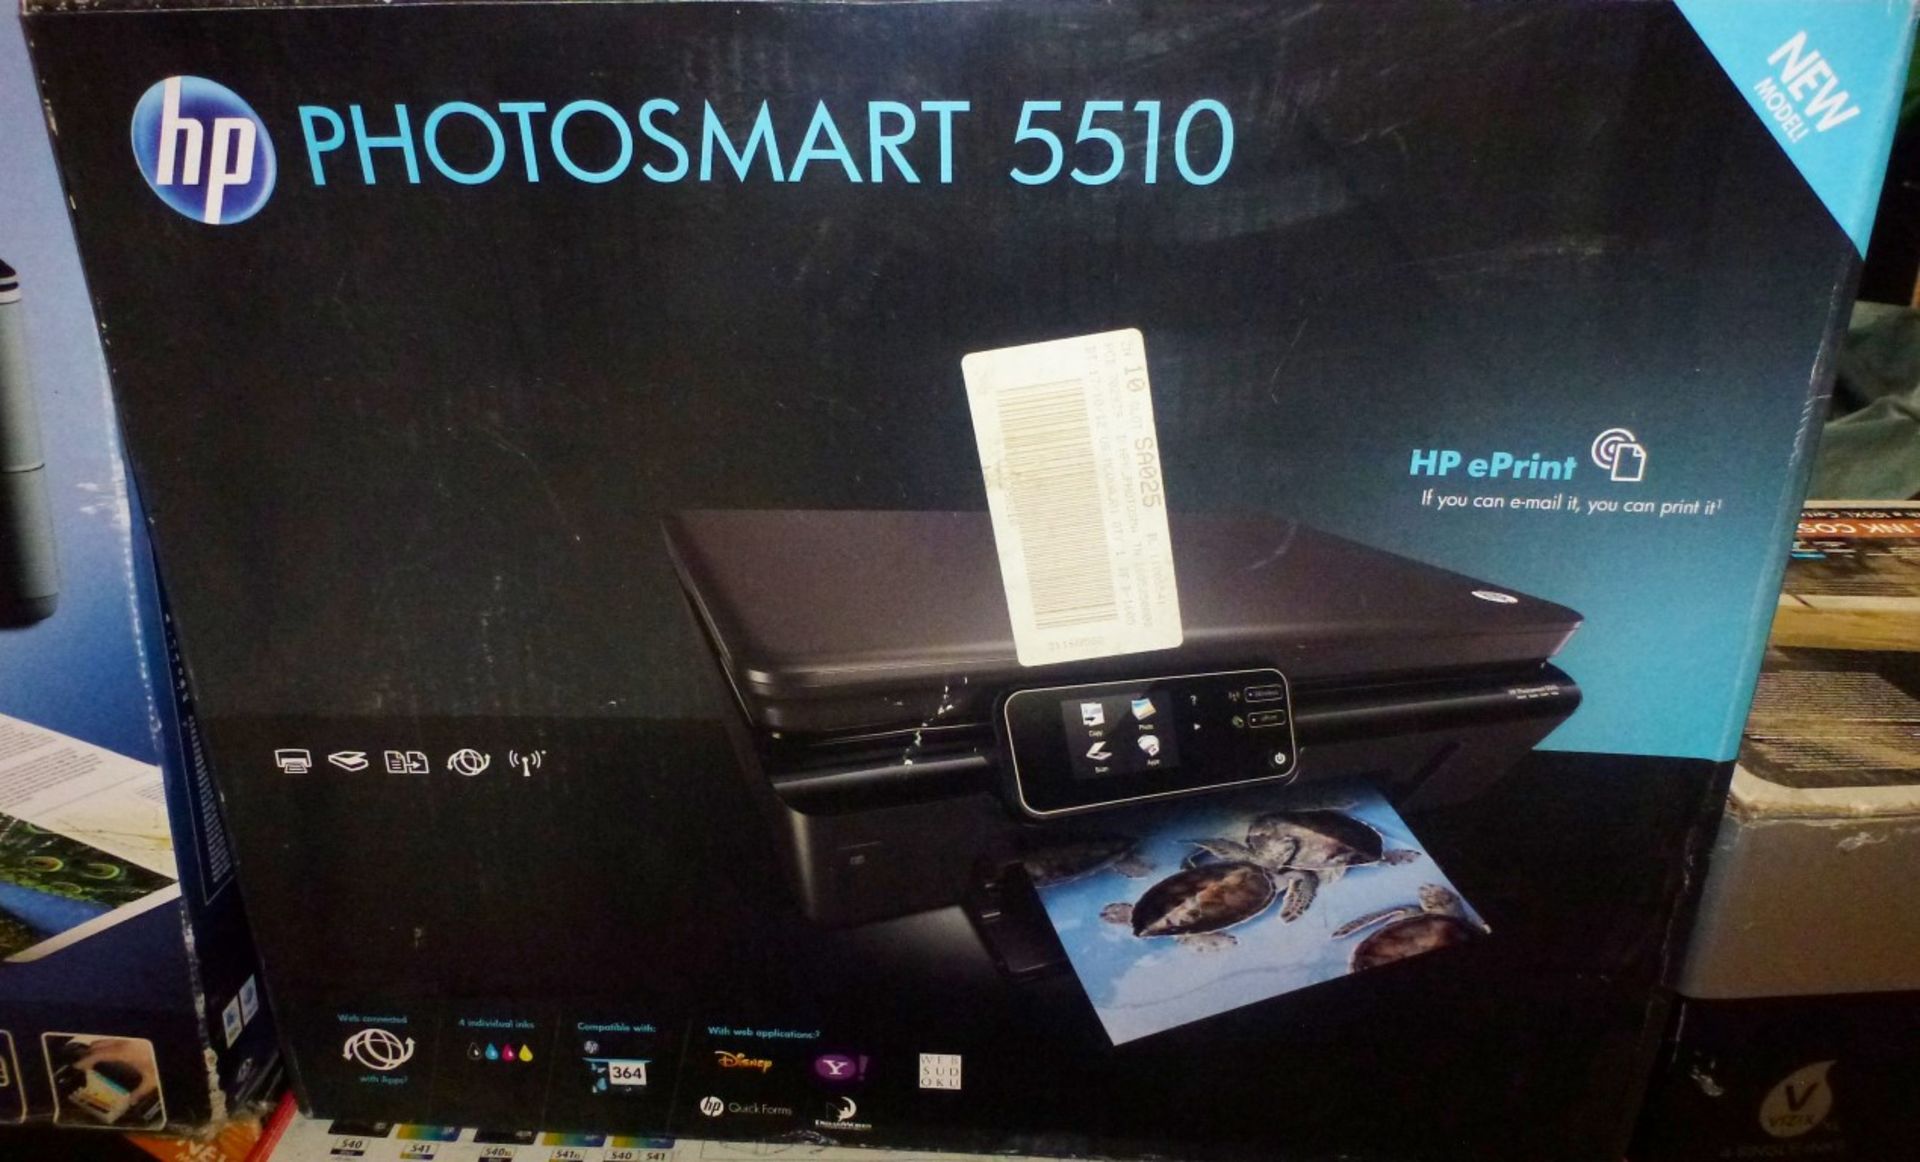 8 x Various Printers - Models Include Epson Stylus SX535WD, HP Deskjet 3070A, HP Photosmart 5510, - Image 11 of 18